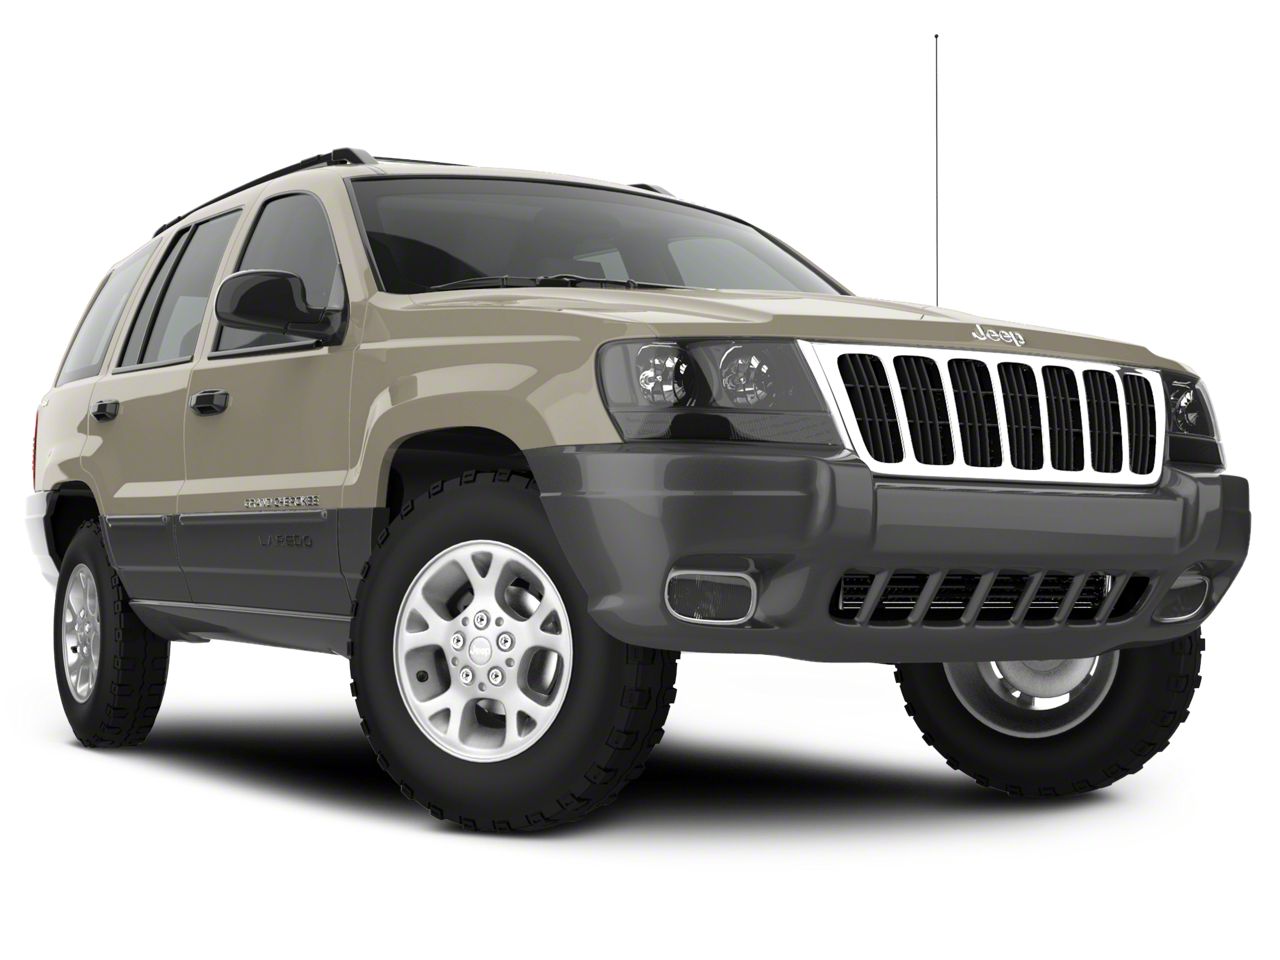 1999-2004 Jeep Grand Cherokee Accessories & Parts